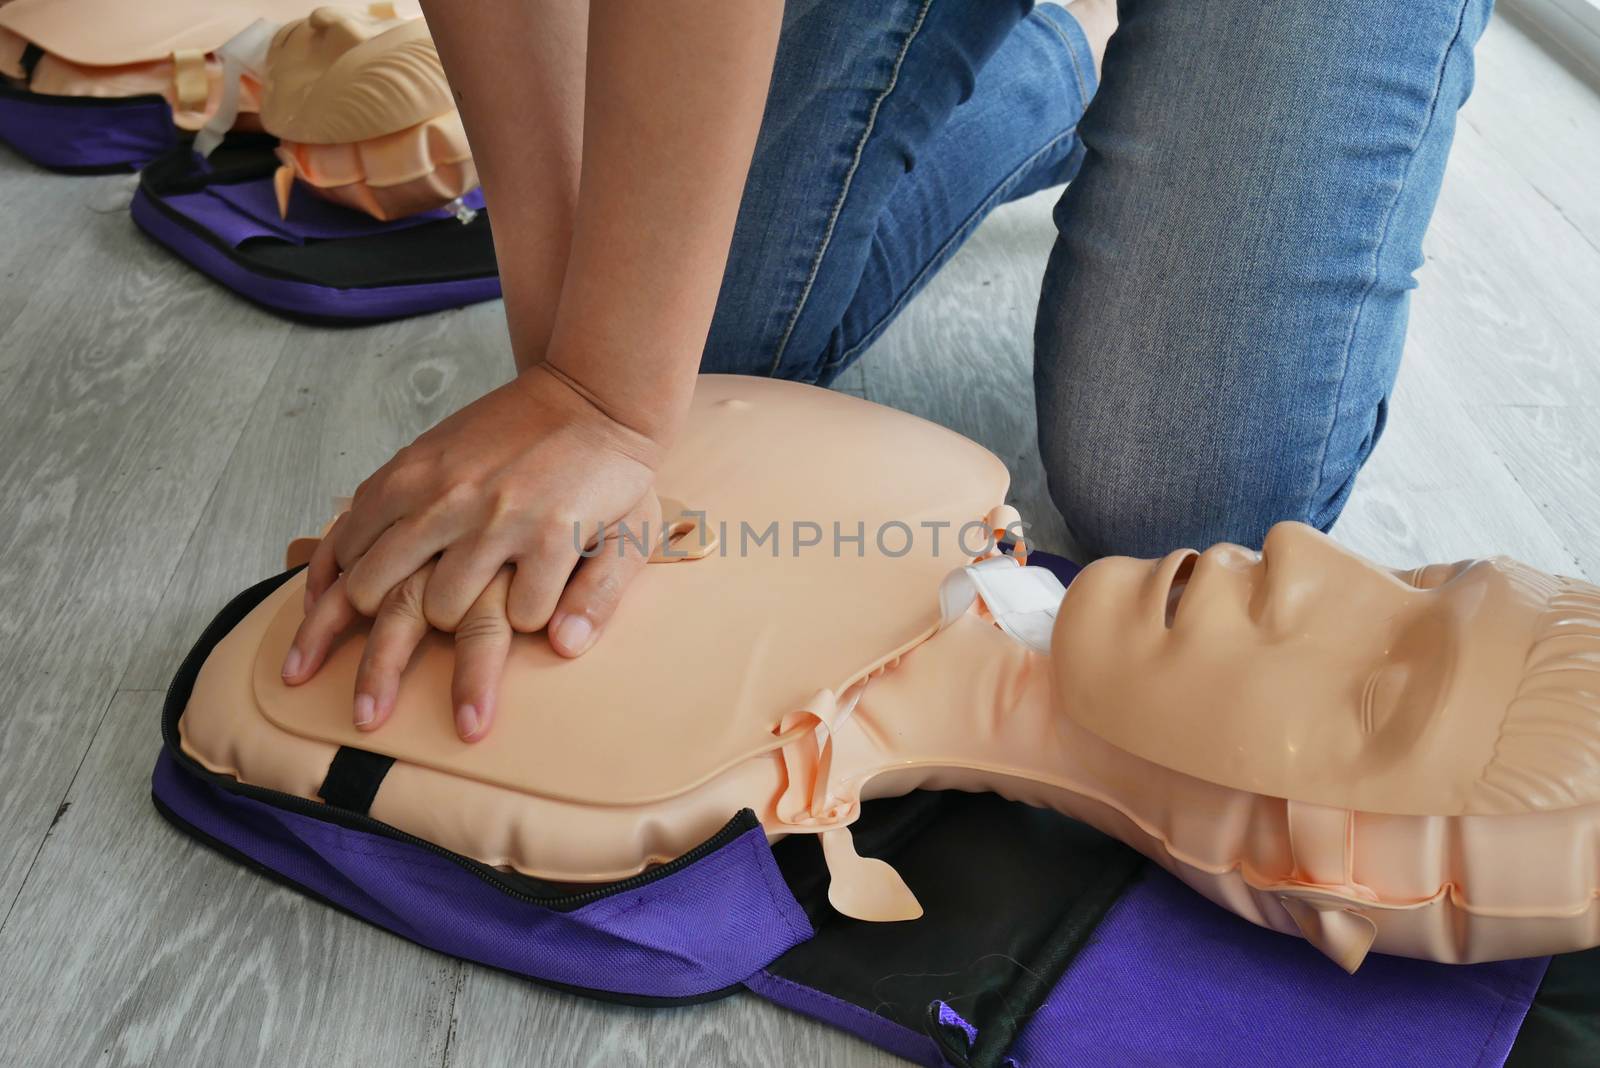 cpr training. close-up of trainee's hand pump on chest of dummy on CPR First Aid Training course for primary safe life